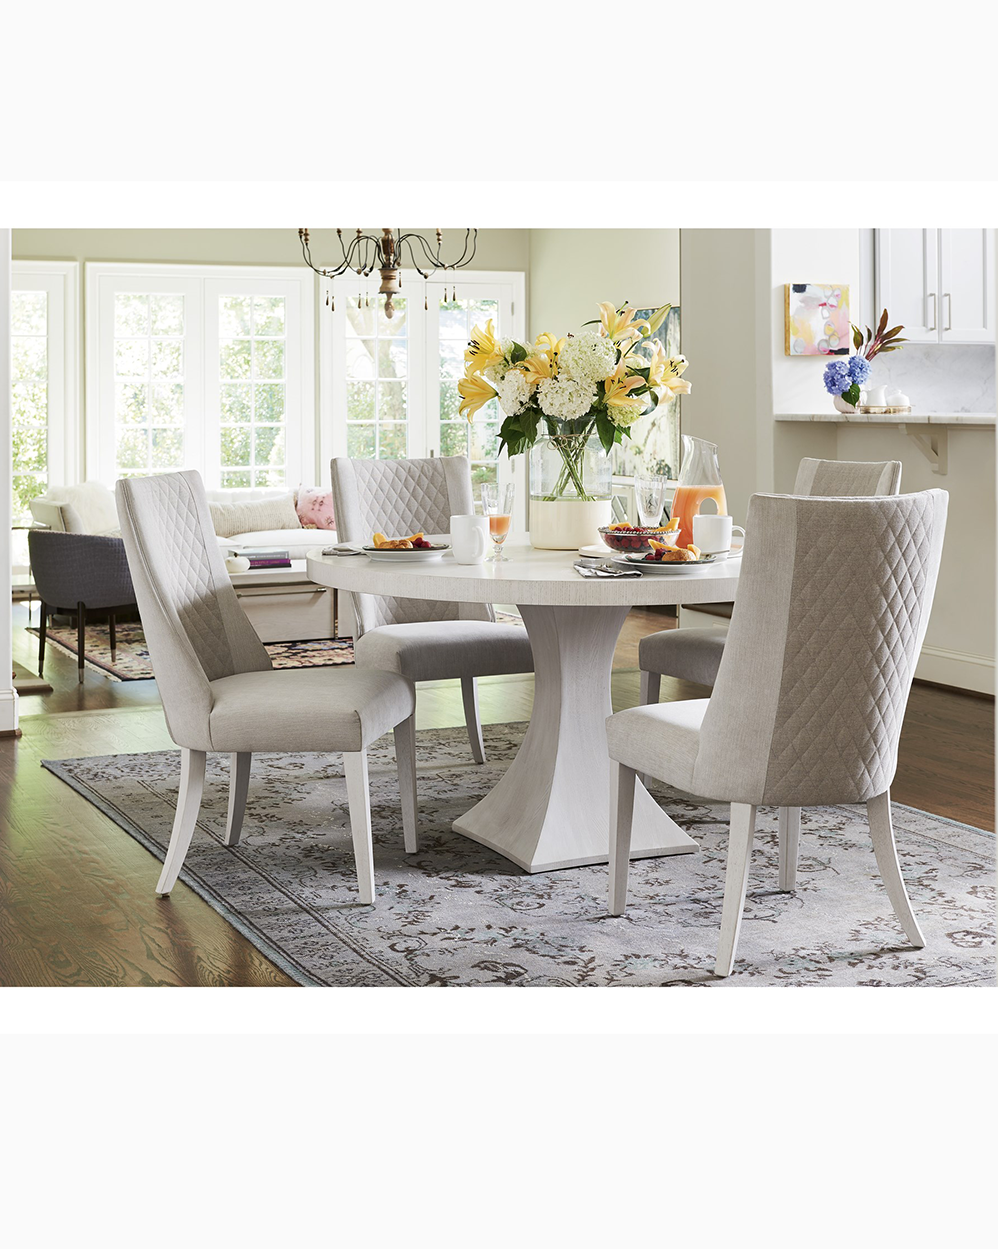 Integrity Dining Table